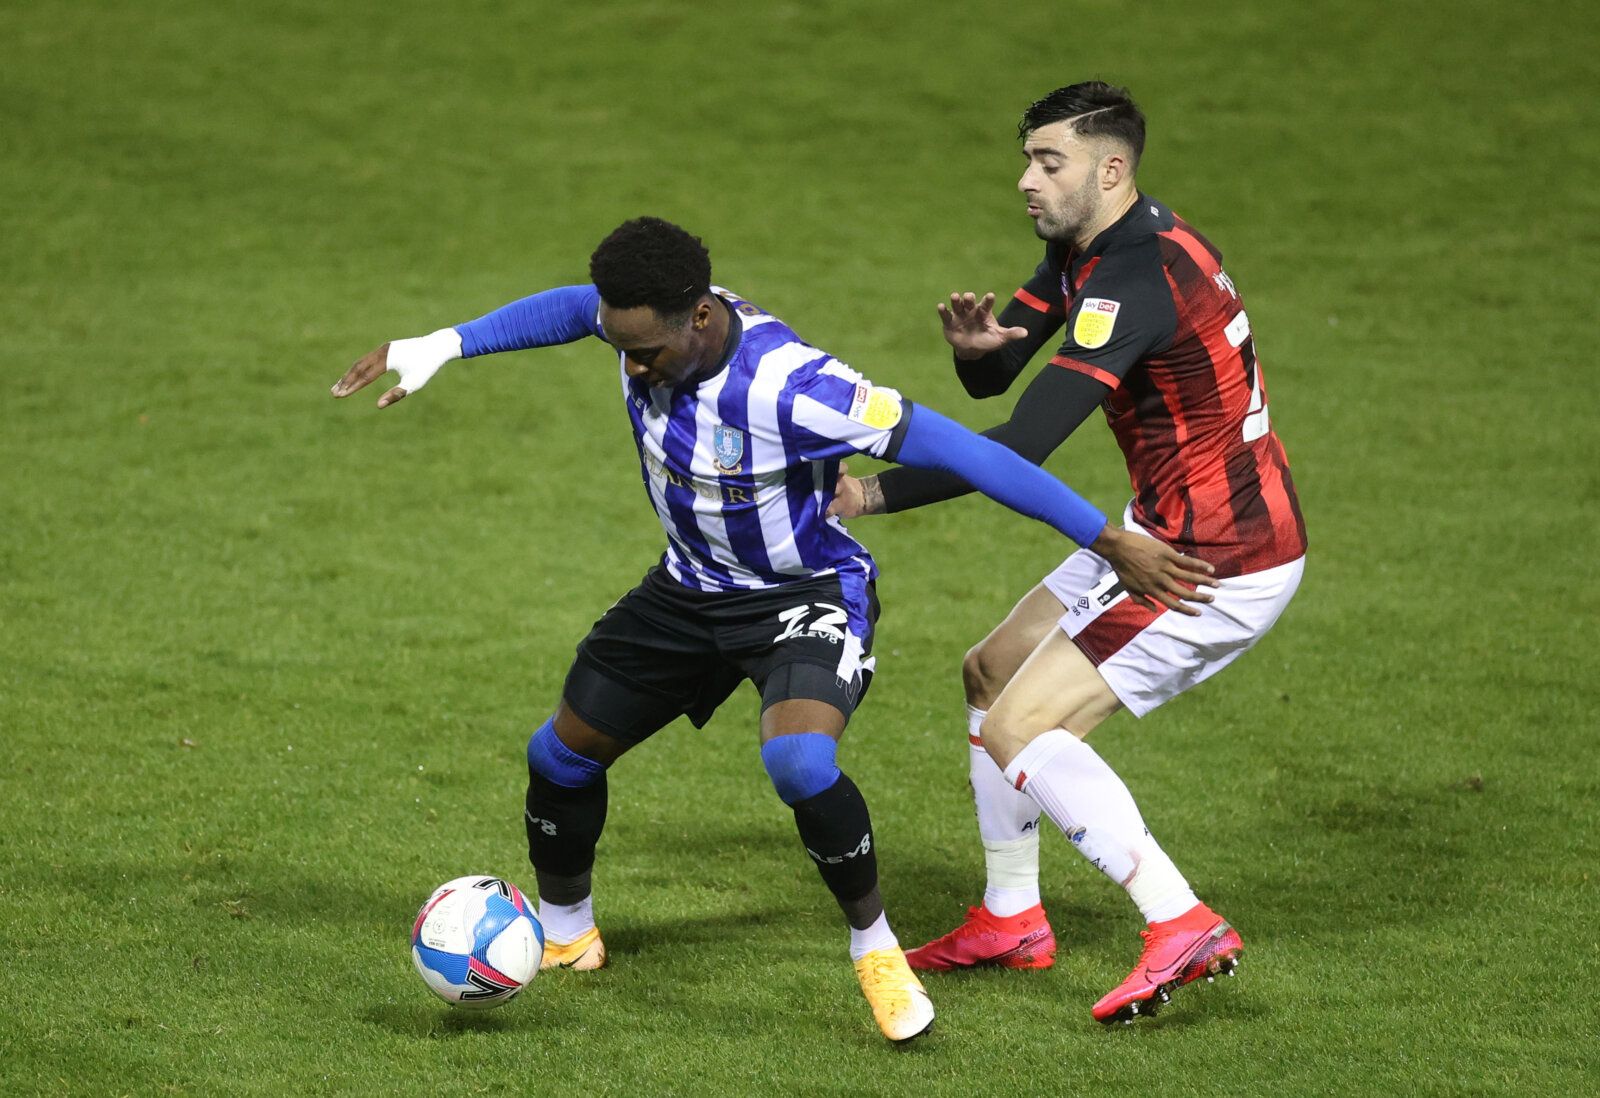 Soccer Football - Championship - Sheffield Wednesday v AFC Bournemouth - Hillsborough, Sheffield, Britain - November 3, 2020 Sheffield Wednesday's Moses Odubajo in action with Bournemouth's Diego Rico Action Images/Carl Recine EDITORIAL USE ONLY. No use with unauthorized audio, video, data, fixture lists, club/league logos or 'live' services. Online in-match use limited to 75 images, no video emulation. No use in betting, games or single club /league/player publications.  Please contact your acc